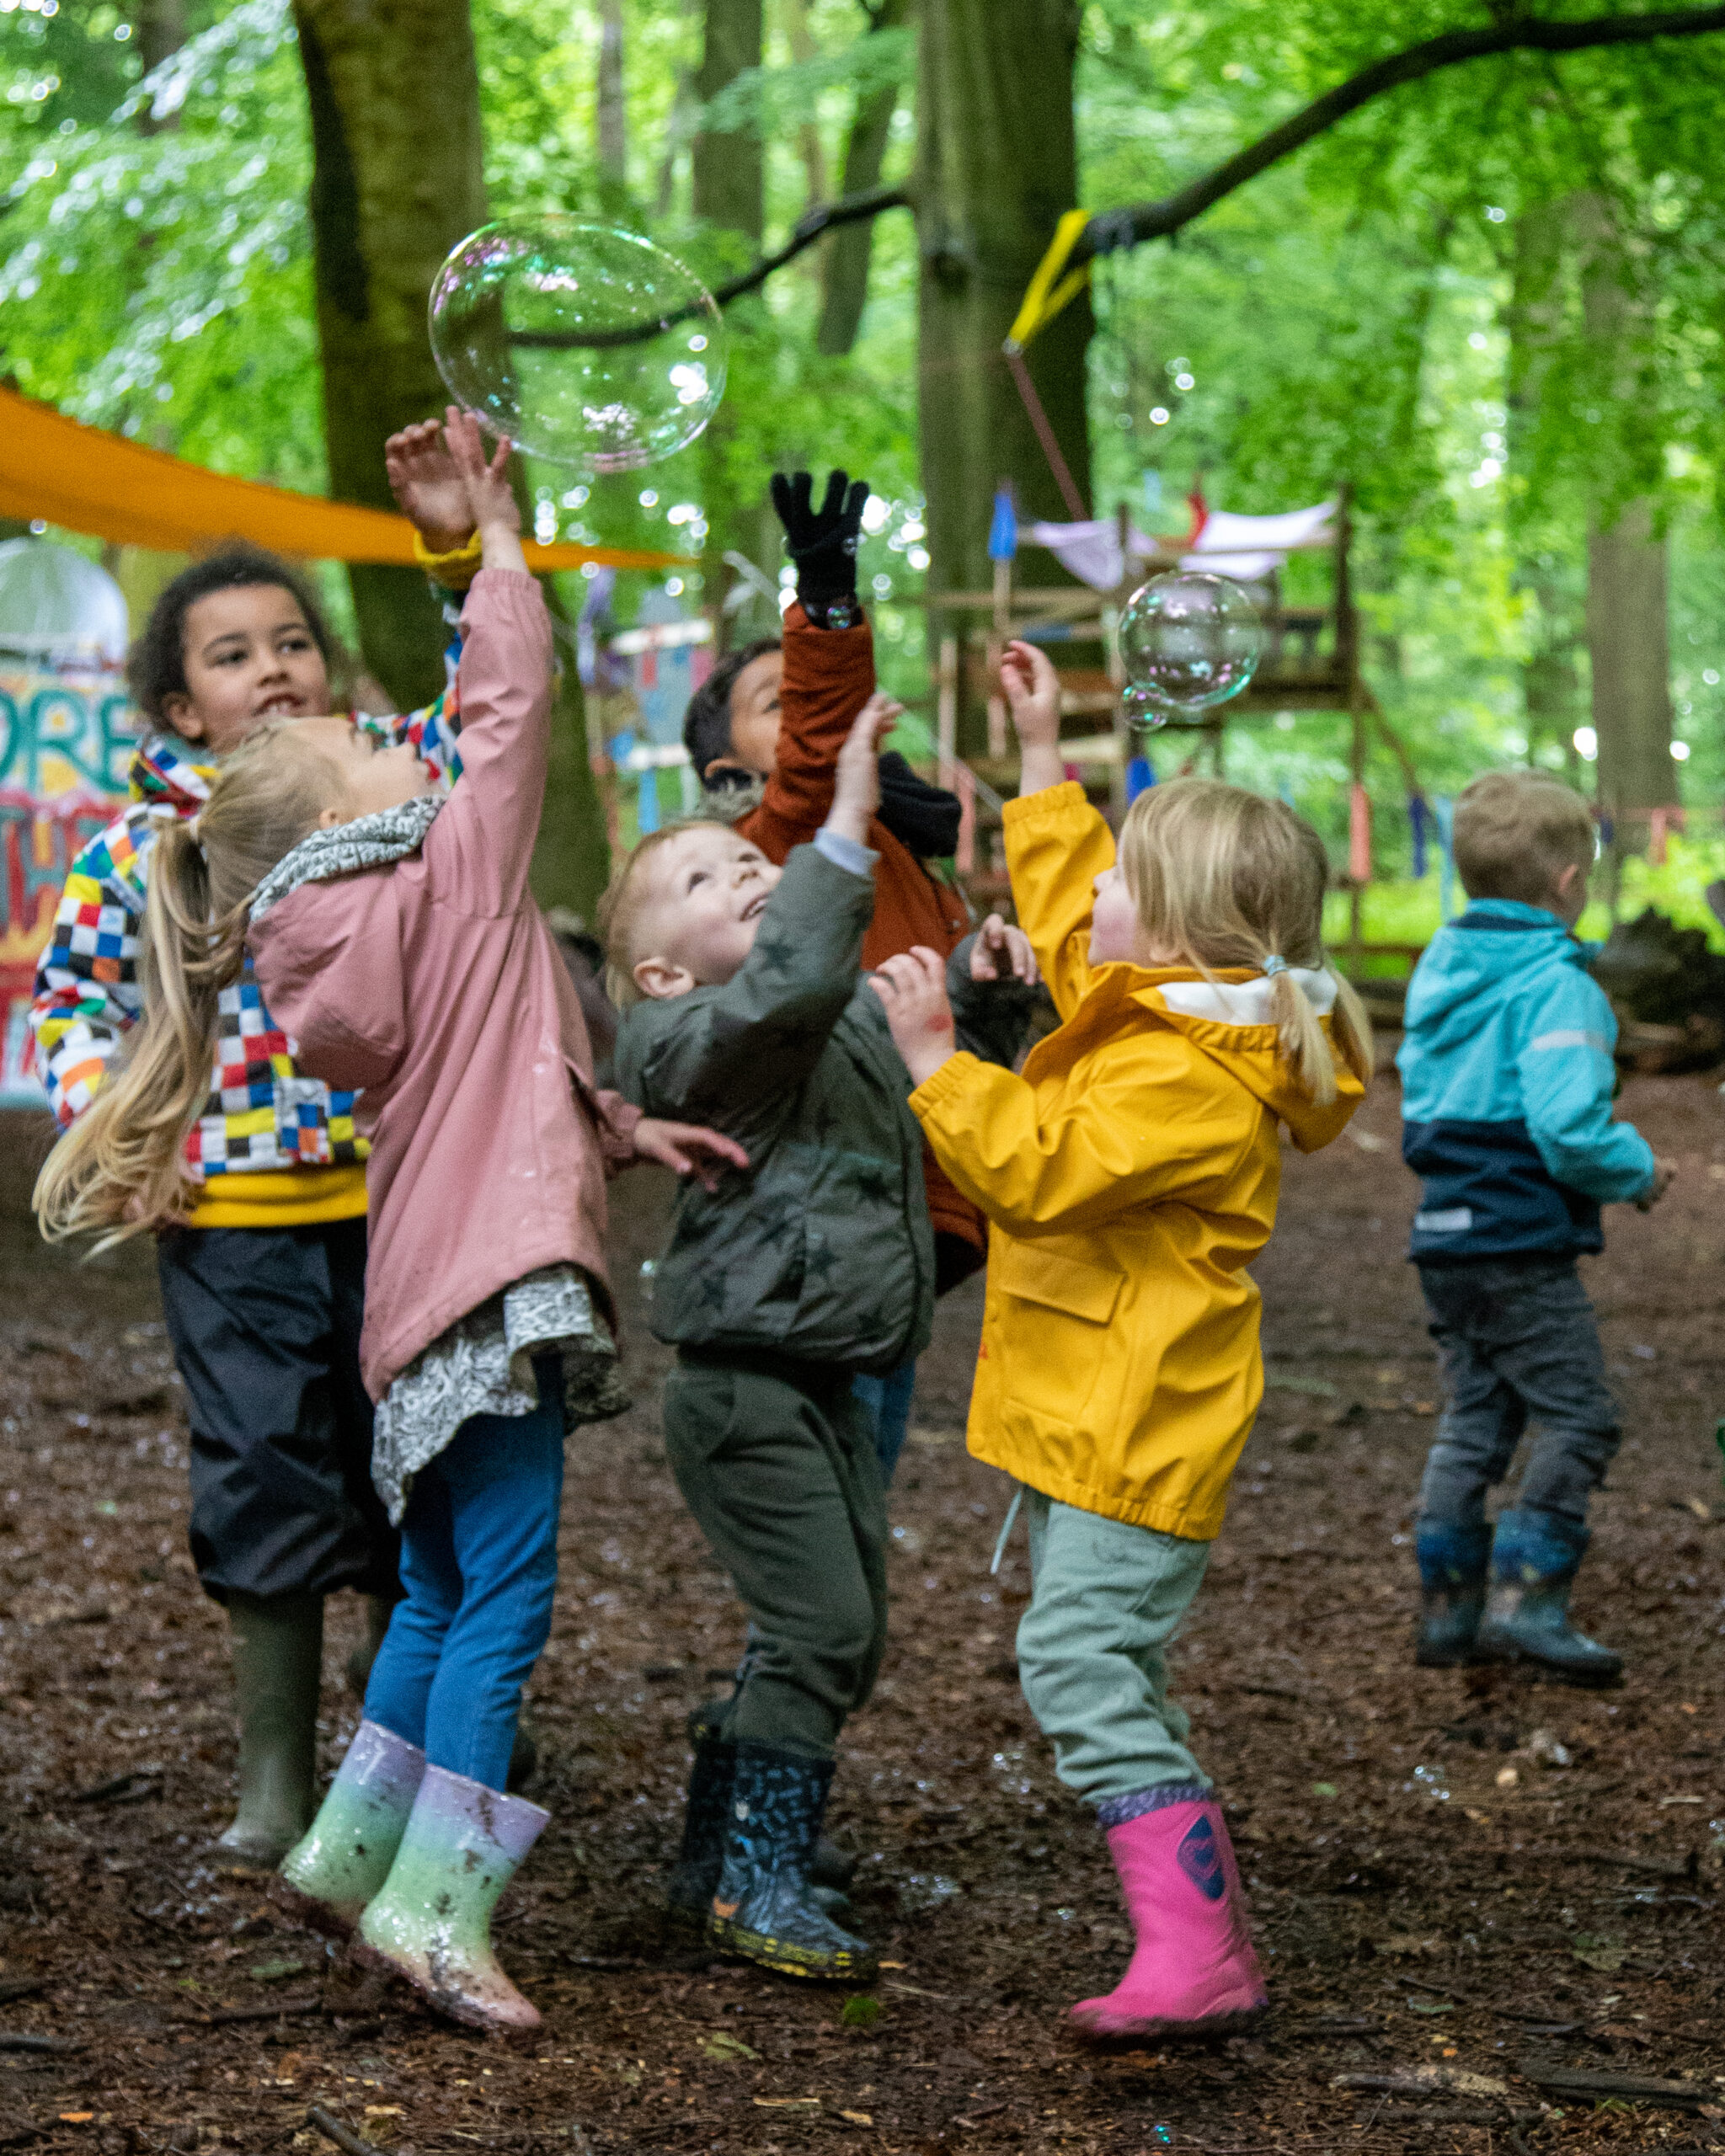 a Photograph of group of excited children playing with giant bubbles surrounded by trees.